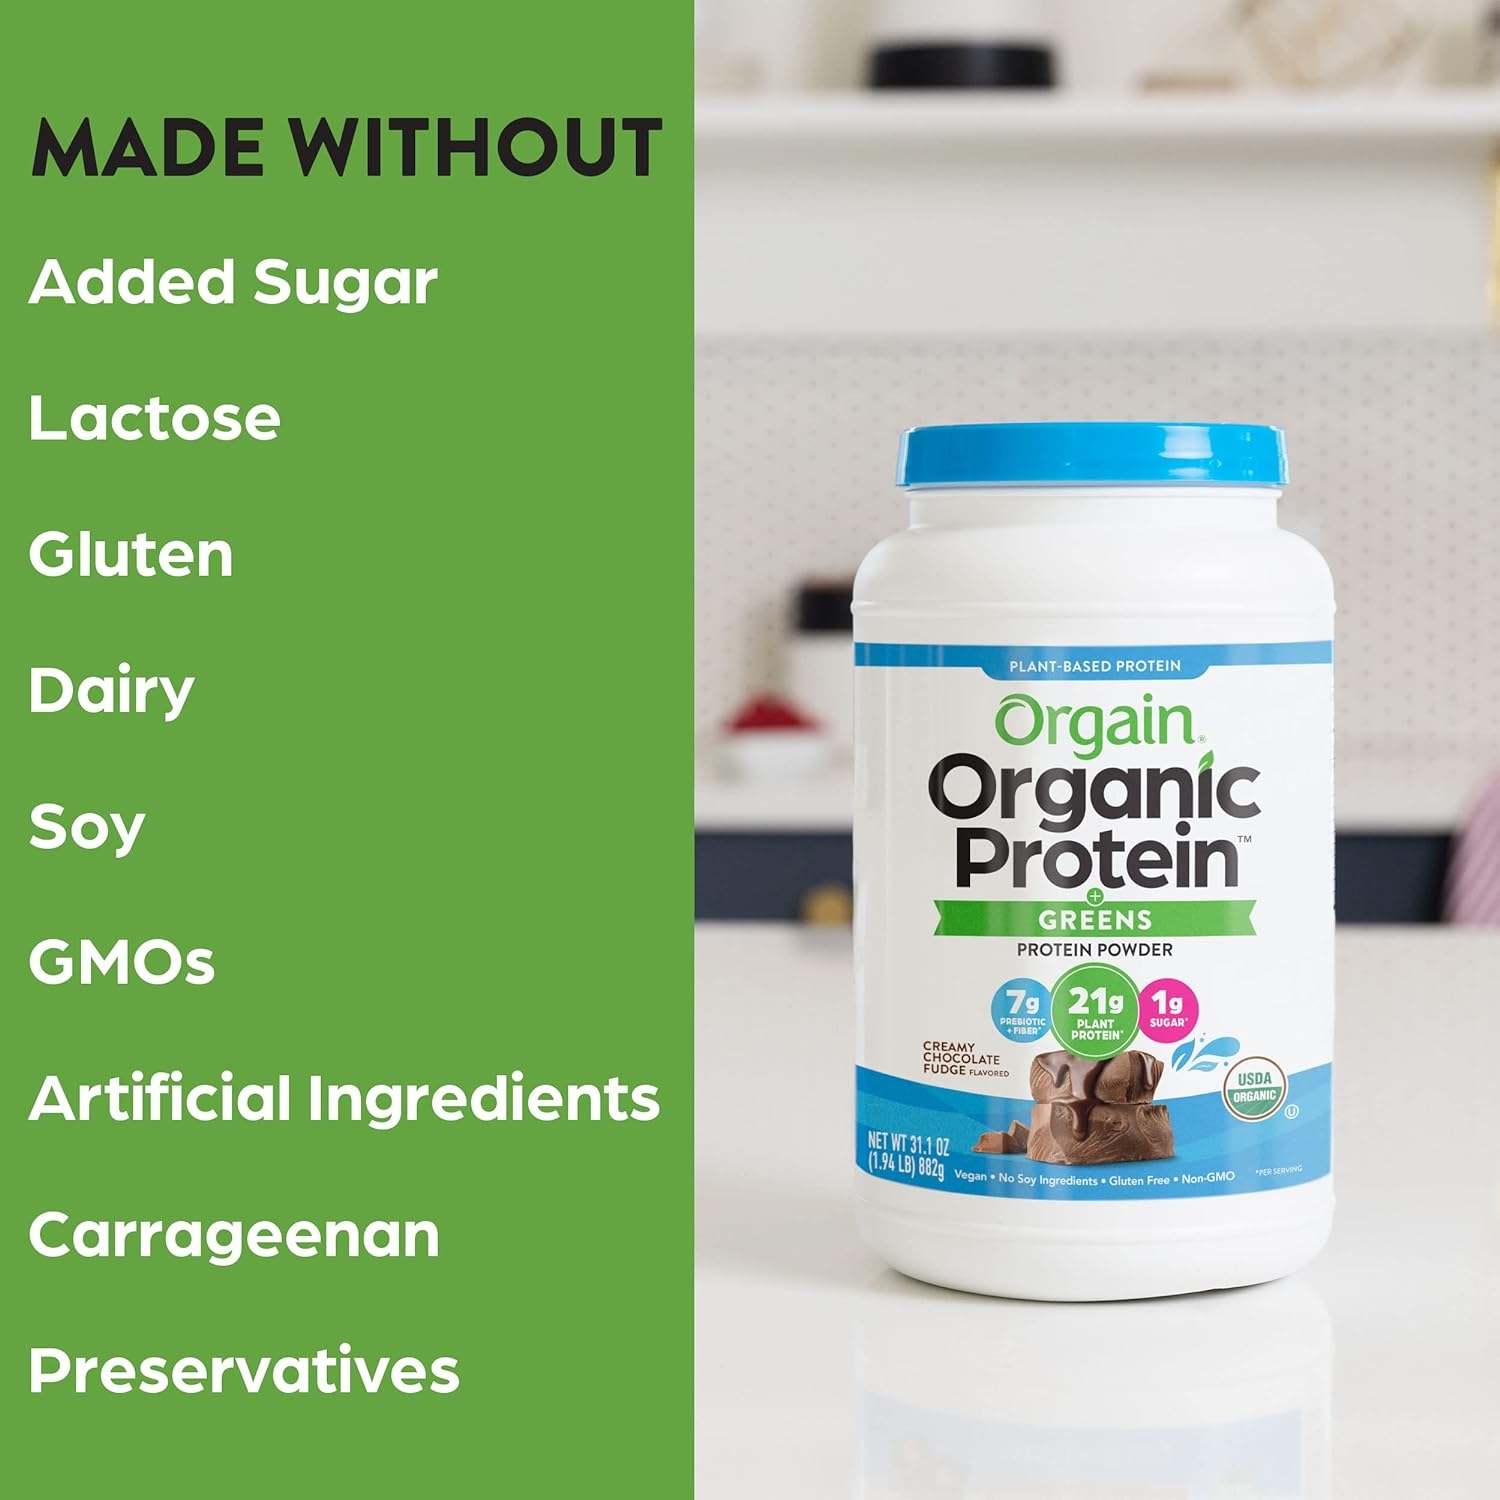 Orgain Organic Protein & Greens Plant Based Protein Powder, Creamy Chocolate Fudge - 21g of Protein, Vegan, Gluten Free, Non-GMO, 1.94 Lb, 1 Count (Packaging May Vary)